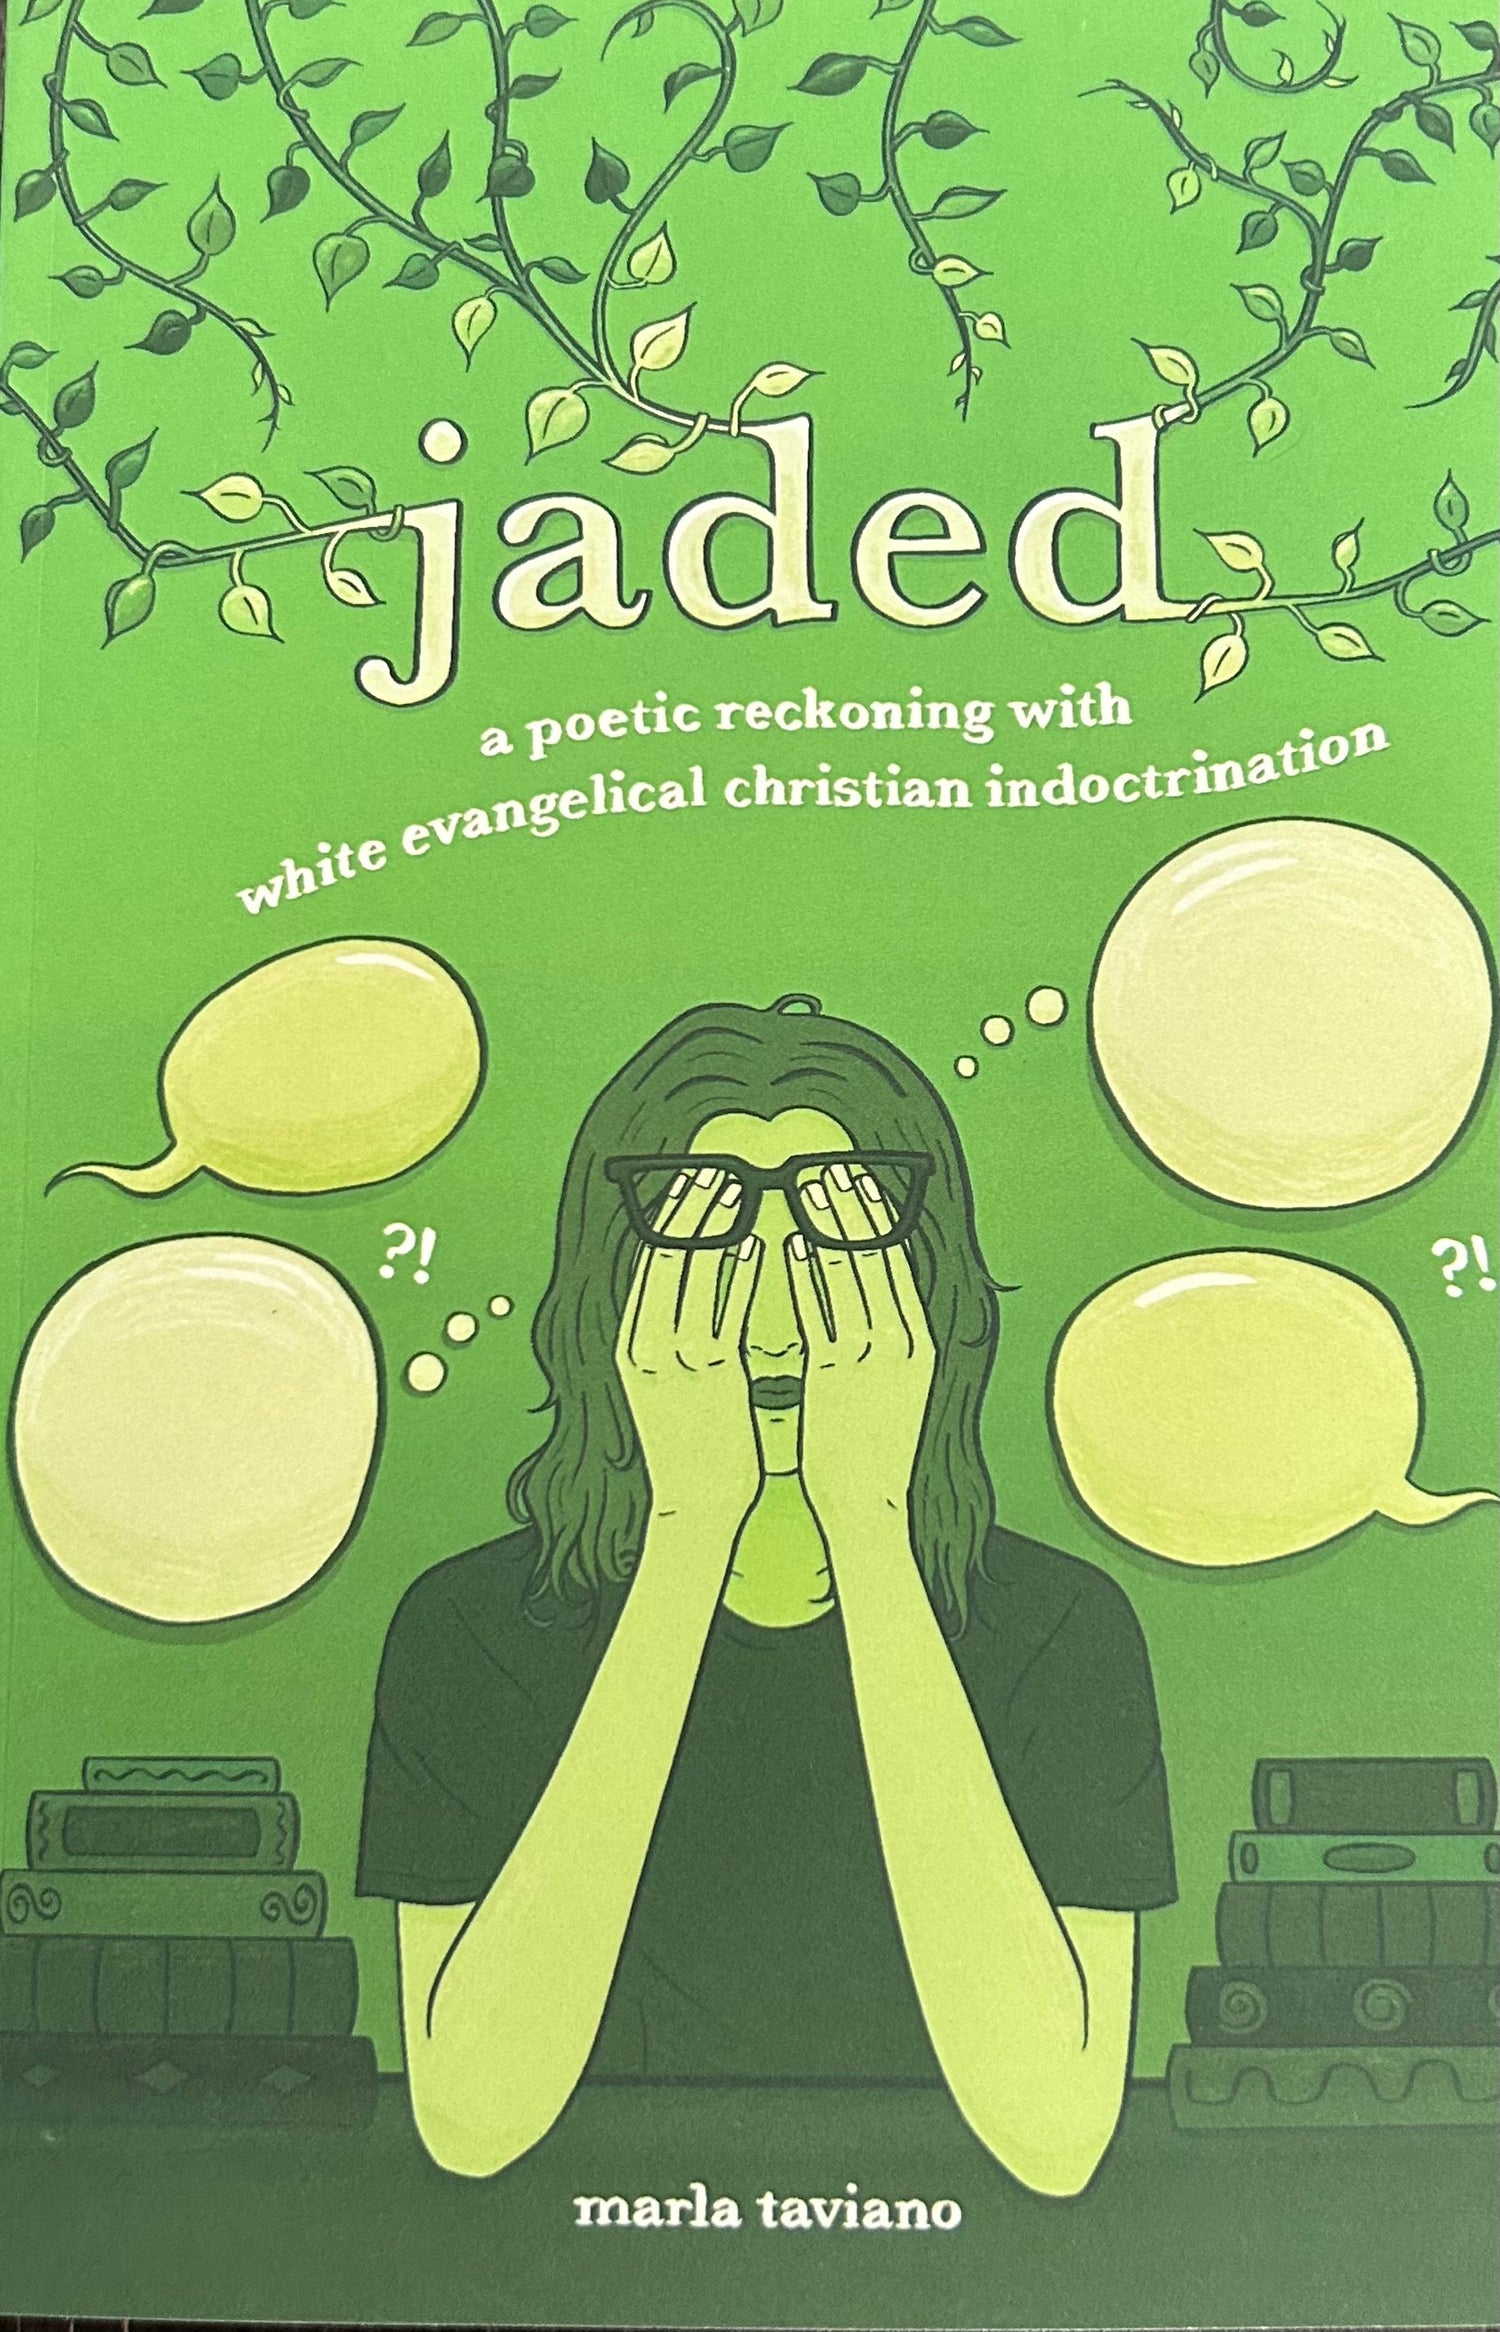 jaded: a poetic reckoning with white evangelical christian indoctrination (Signed Copy)